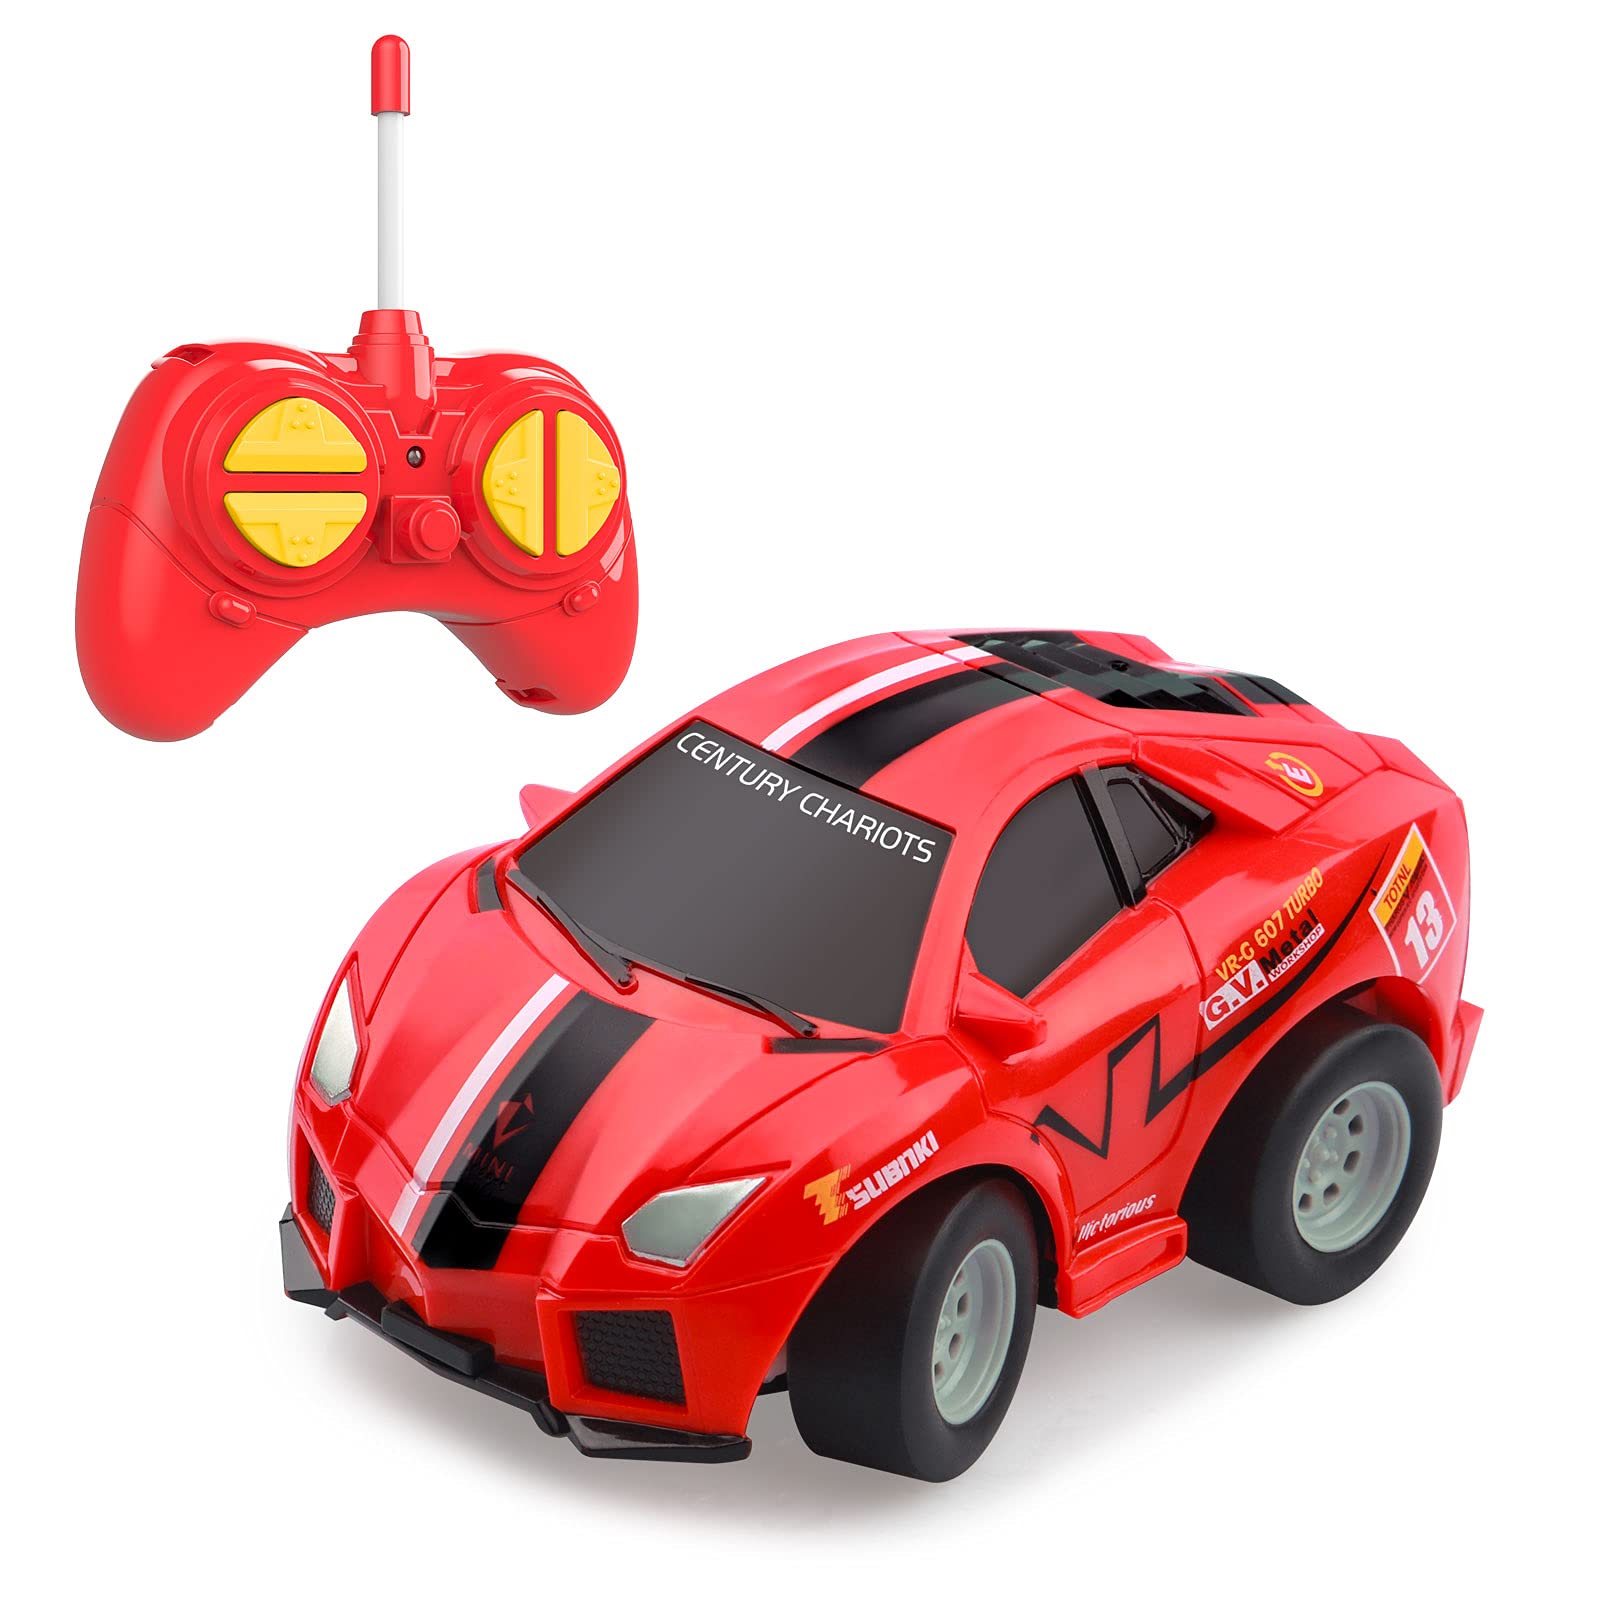 Toys for 2-5 Year Old Boys,Mini Remote Control Car,Toddler Toys Age 2-4,RC Car for Kids,Car Toys for Boys 3-5 Year Old,Gifts for 2 3 4 5 Year Old Boys Girls Birthday,Red